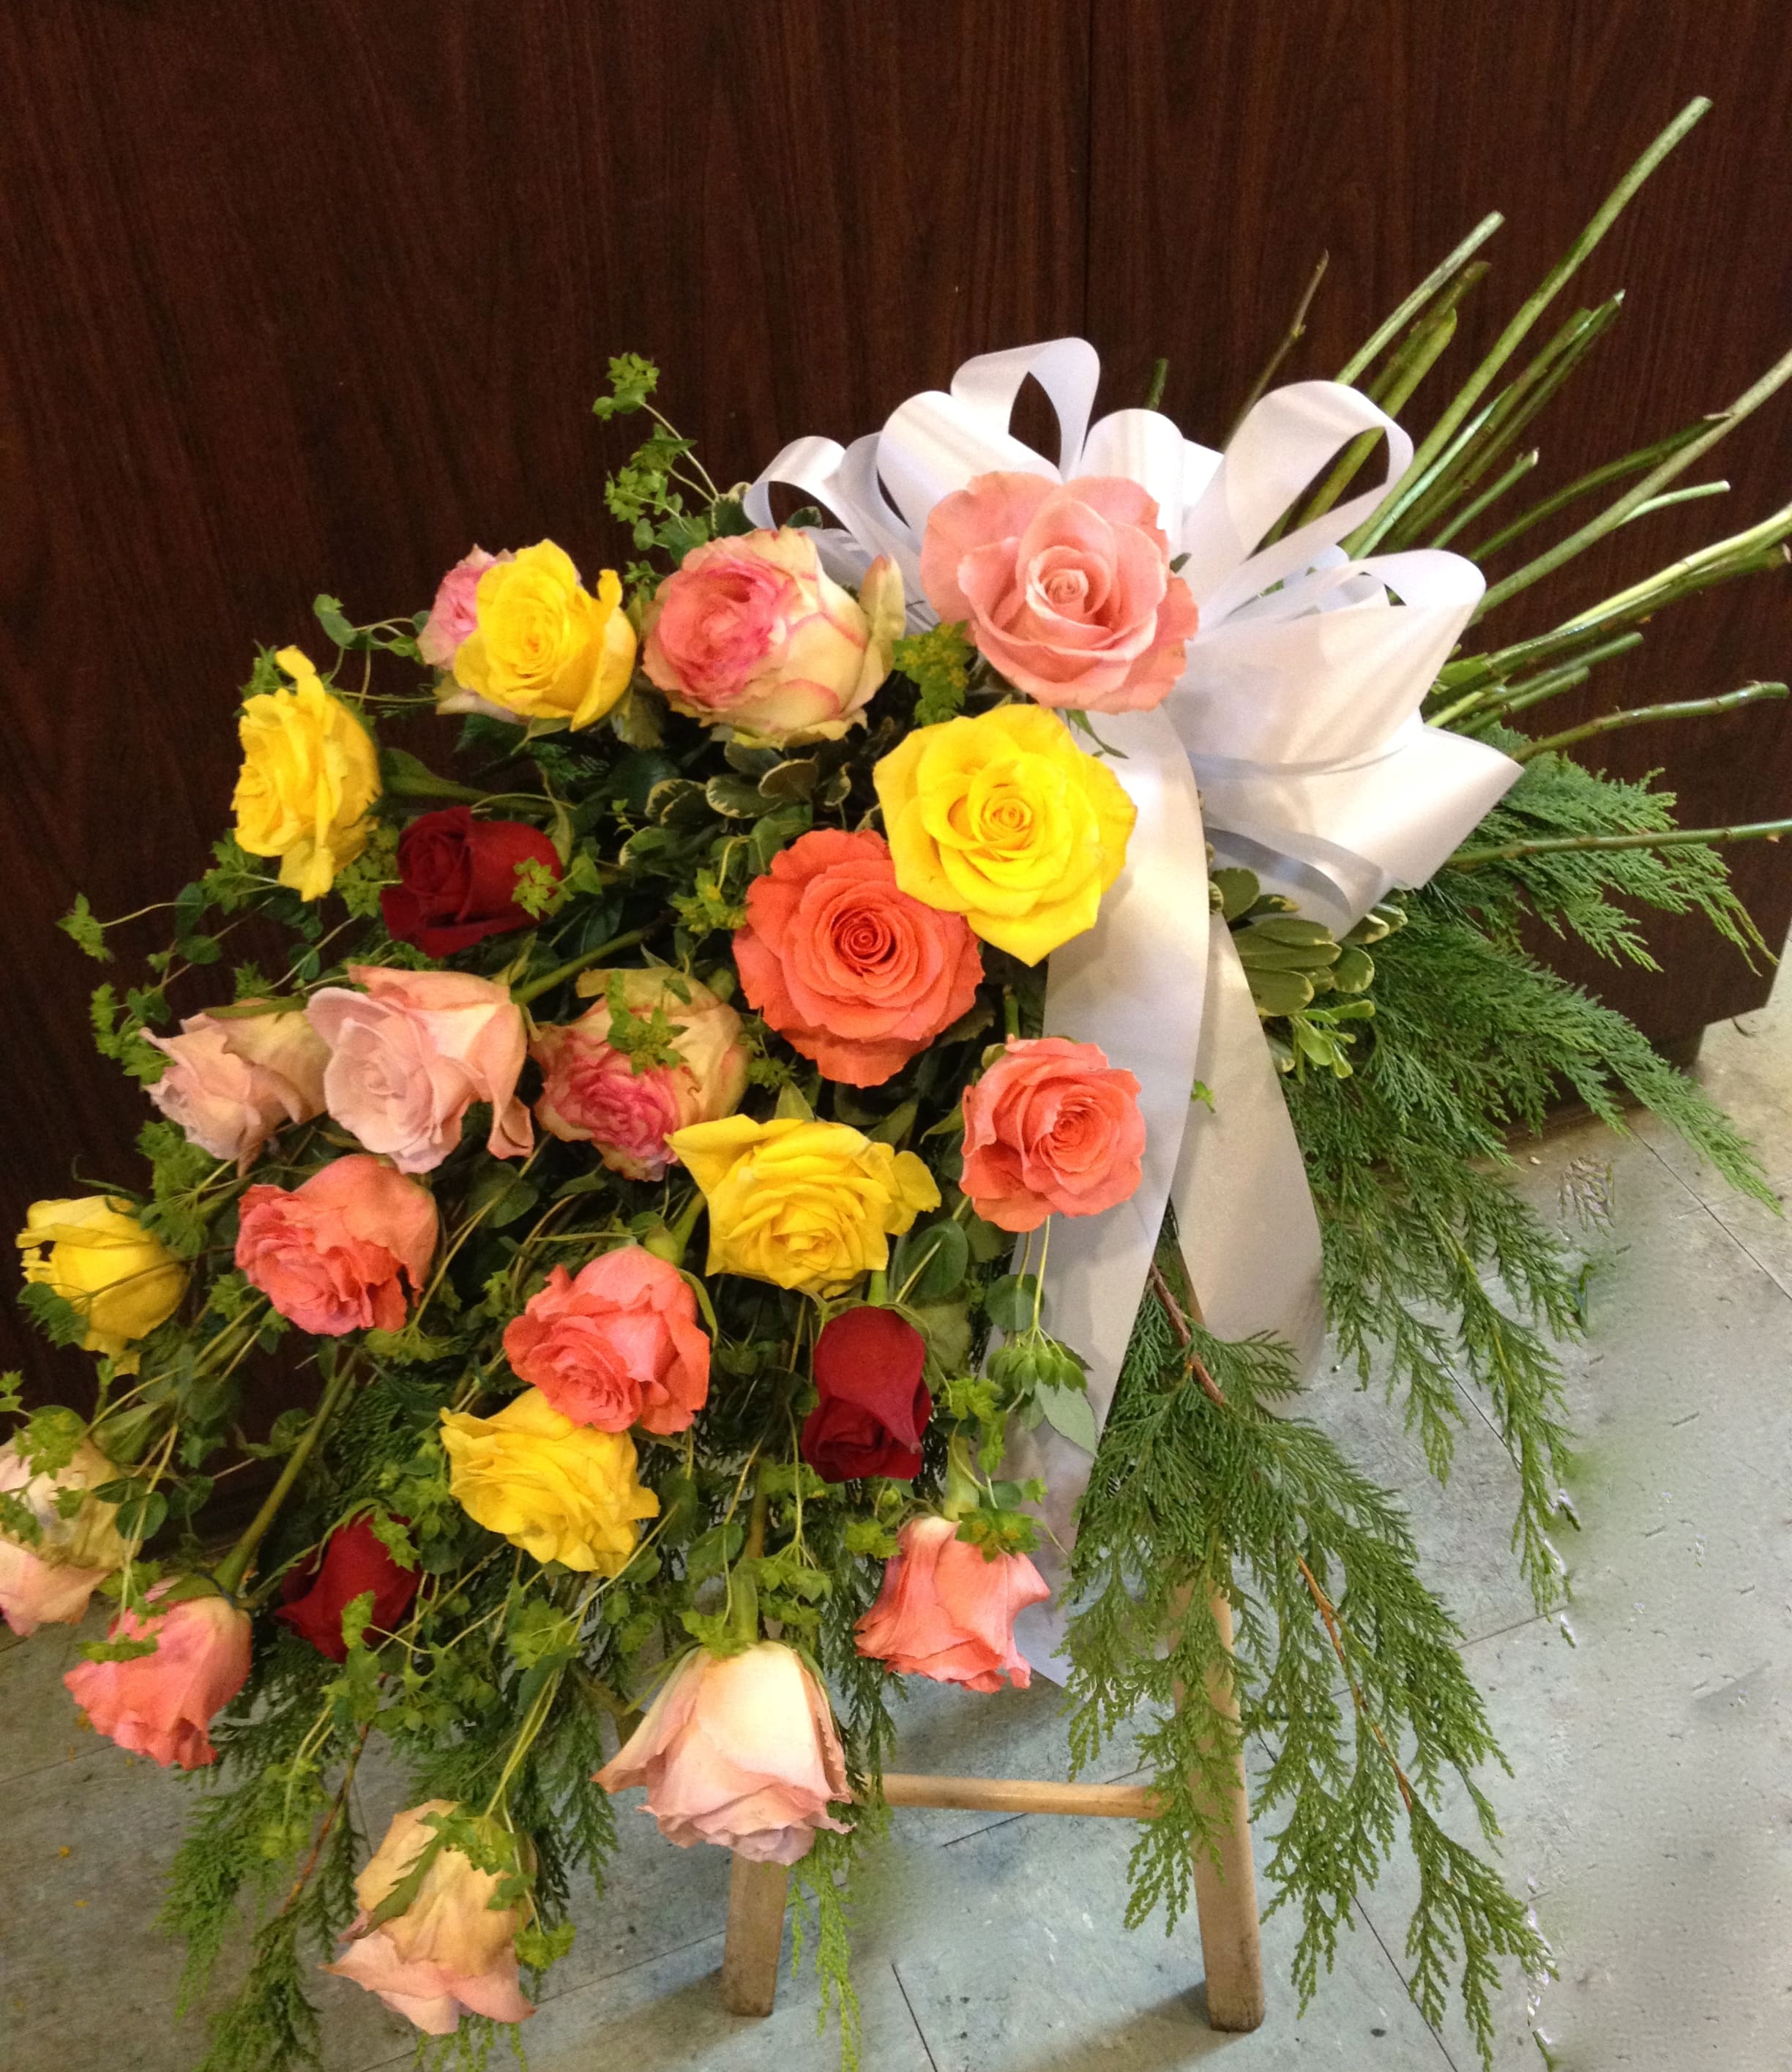 Mixed Color Rose Casket Bouquet  -  Celebrate a life well lived and loved with this beautiful casket bouquet. Roses in a variety of colors are arranged to look like a natural bouquet laying across the casket. 